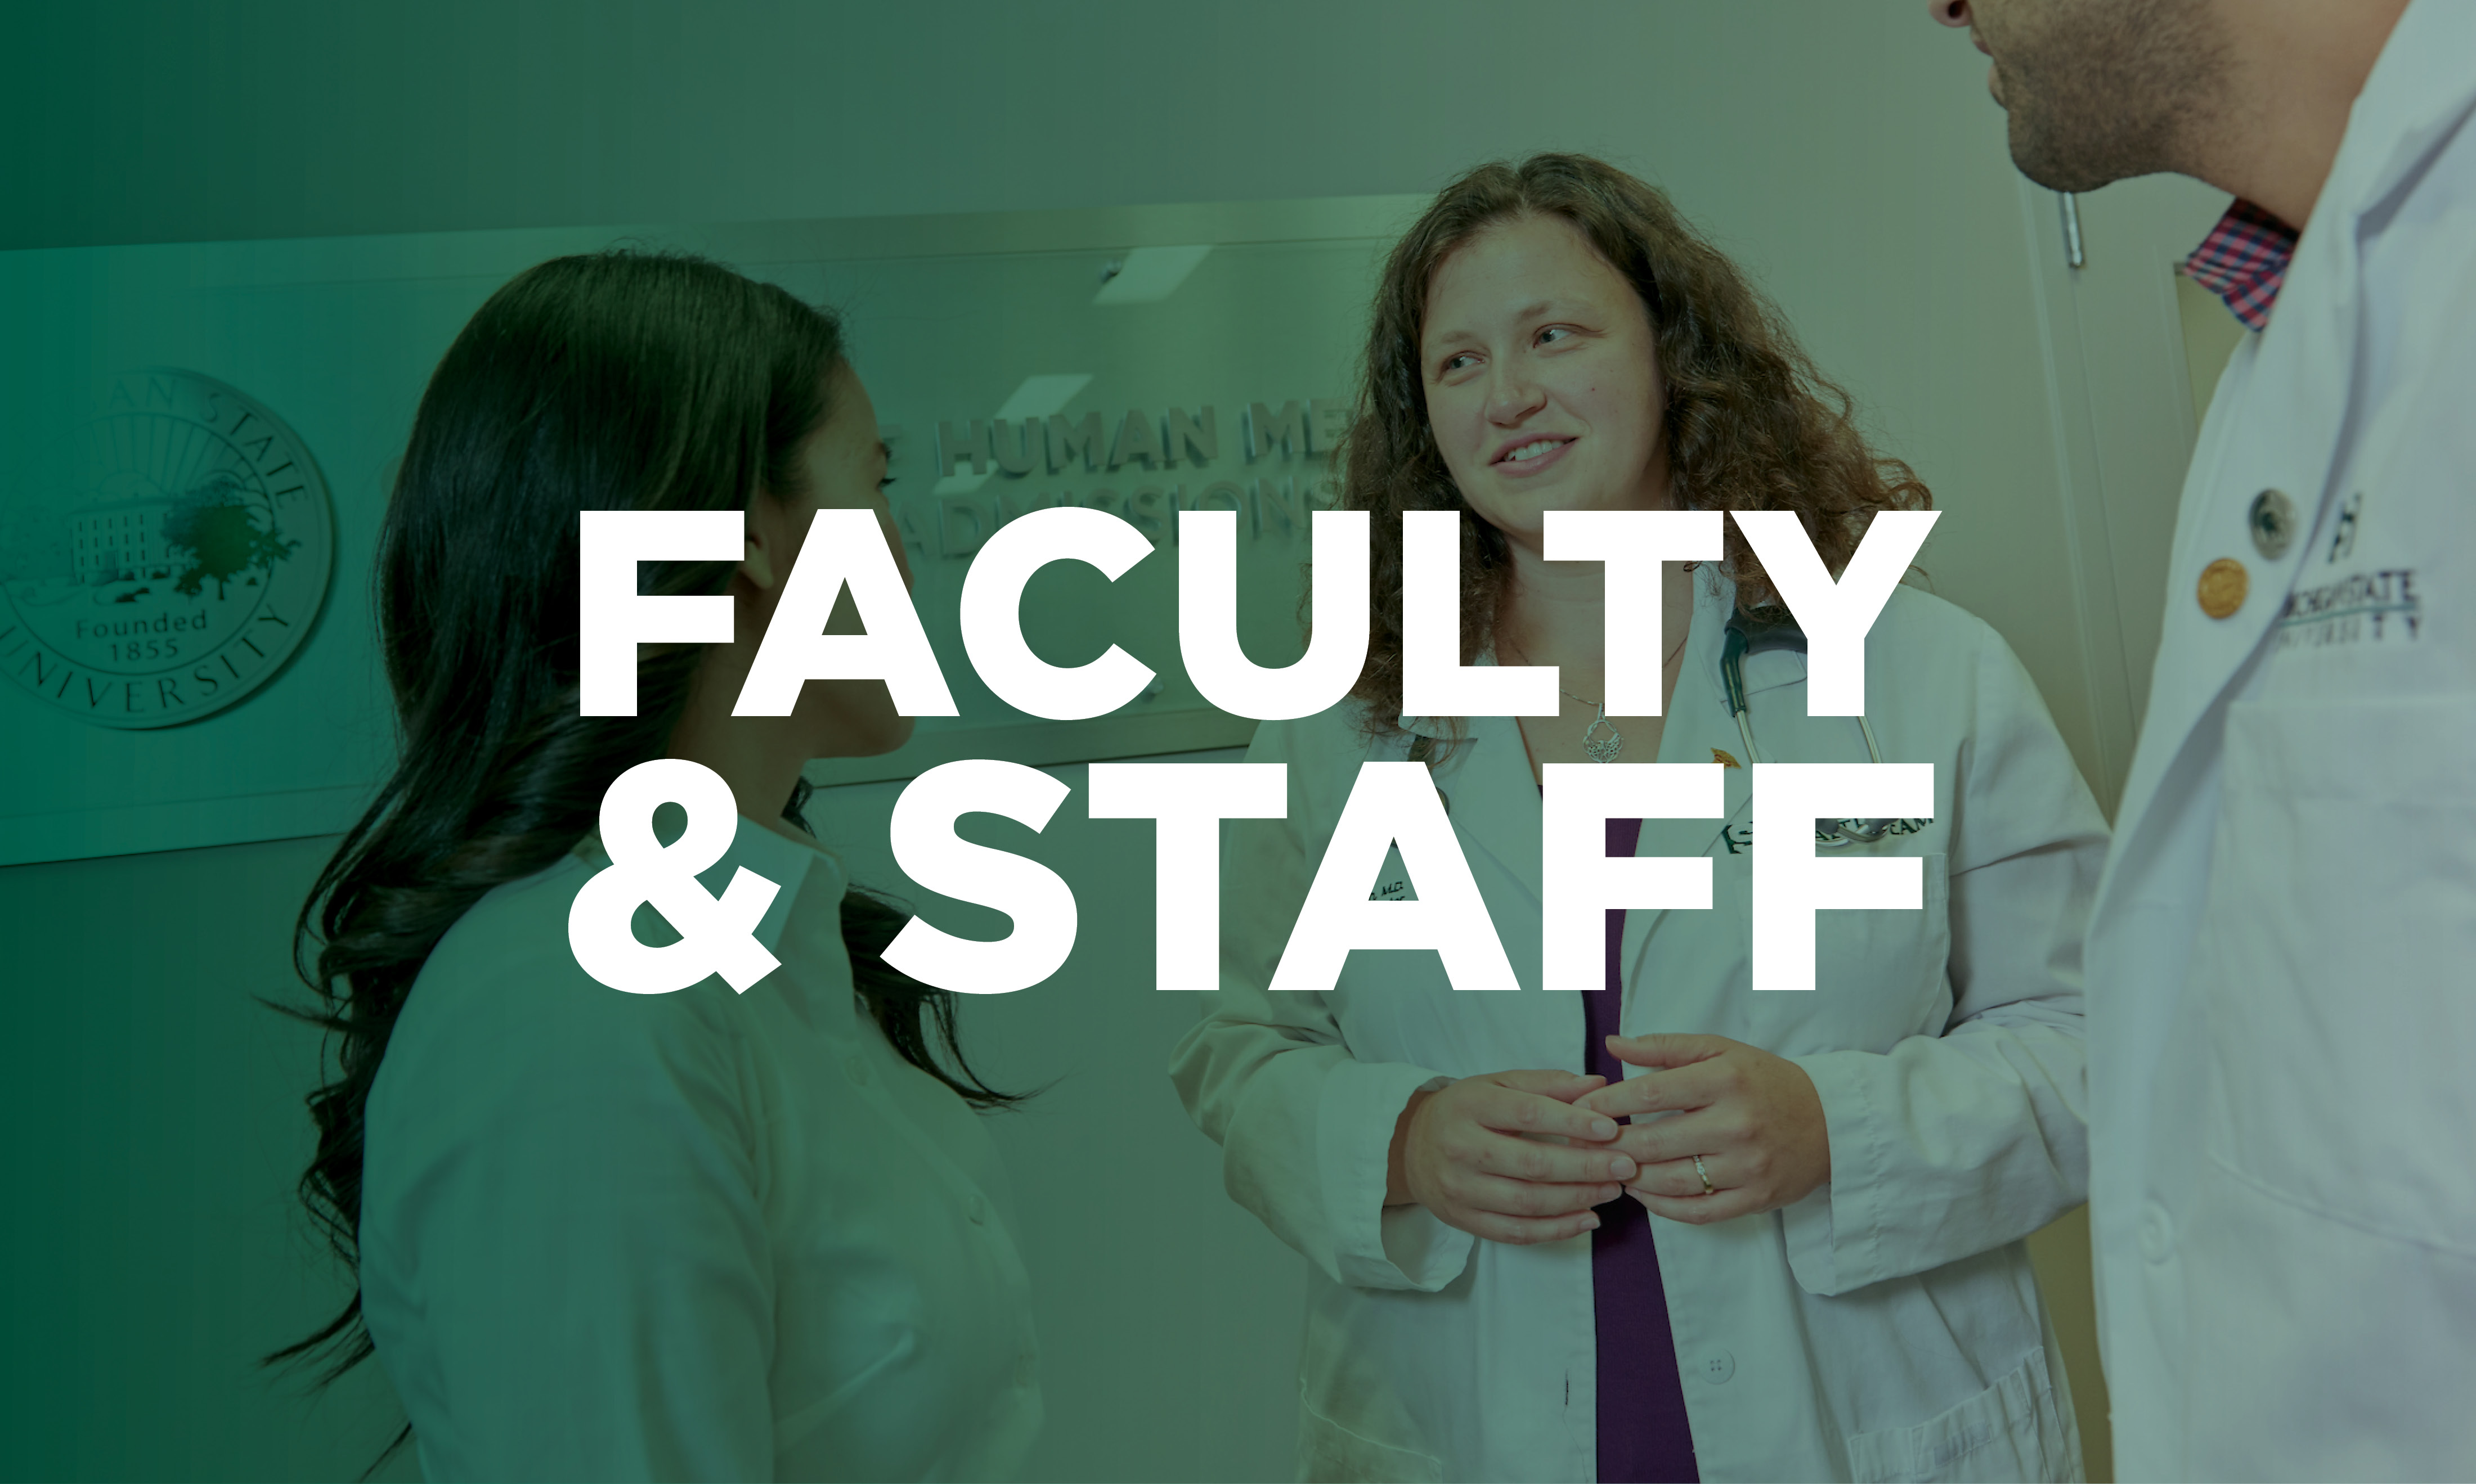 Faculty & Staff graphic